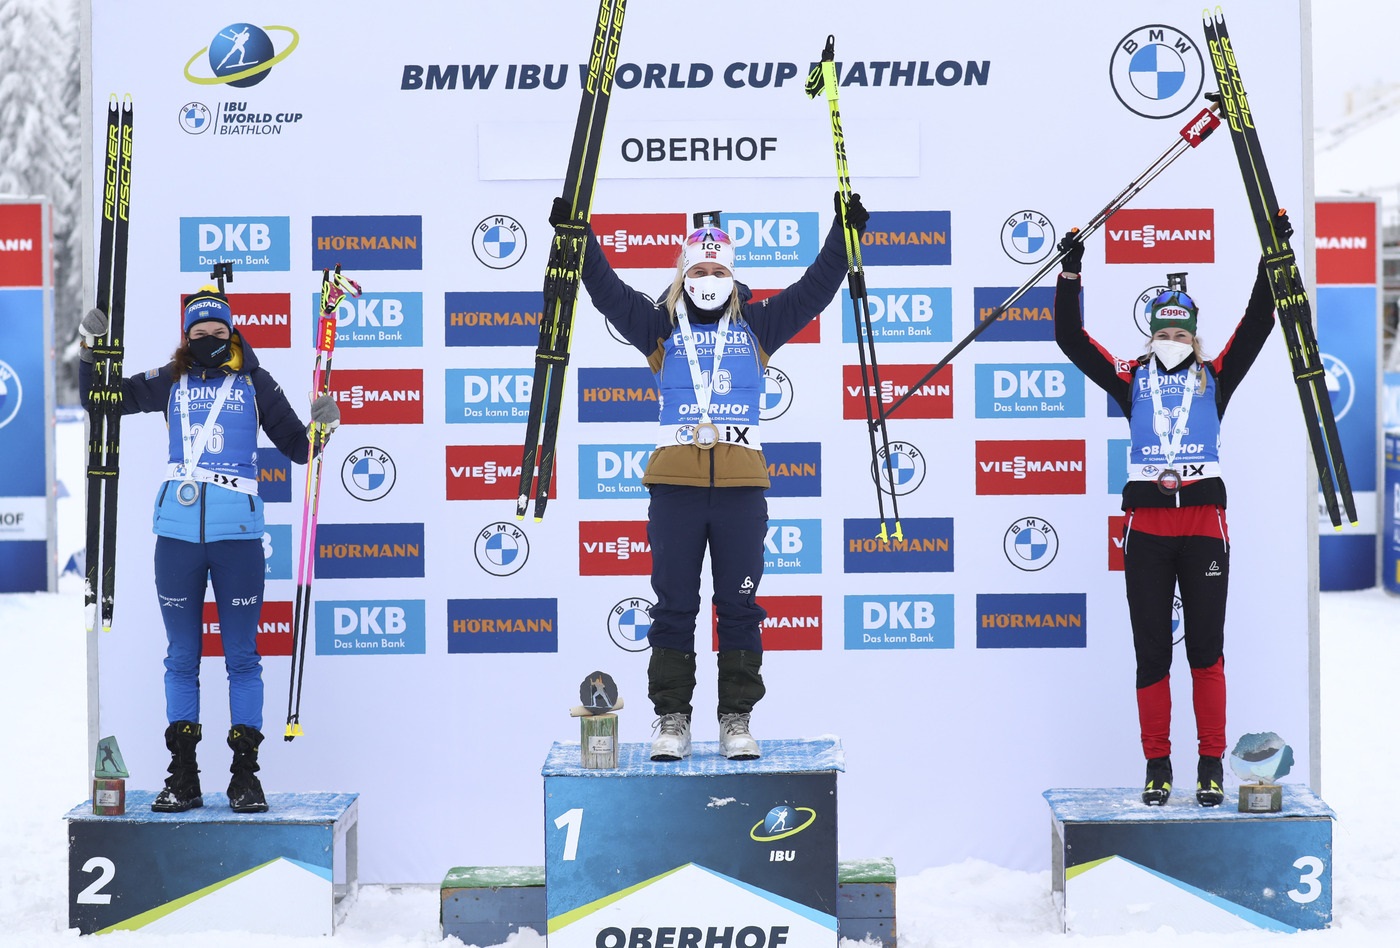 Winner Tiril Eckhoff of Norway, center, runner up Hanna Oeberg of Sweden, left, and Austria's Lisa Theres Hauser who finished third celebrate on the podium after the women's 7.5 km sprint race at the Biathlon World Cup in Oberhof, Germany, Friday, Jan. 8, 2021. (AP Photo/Matthias Schrader)